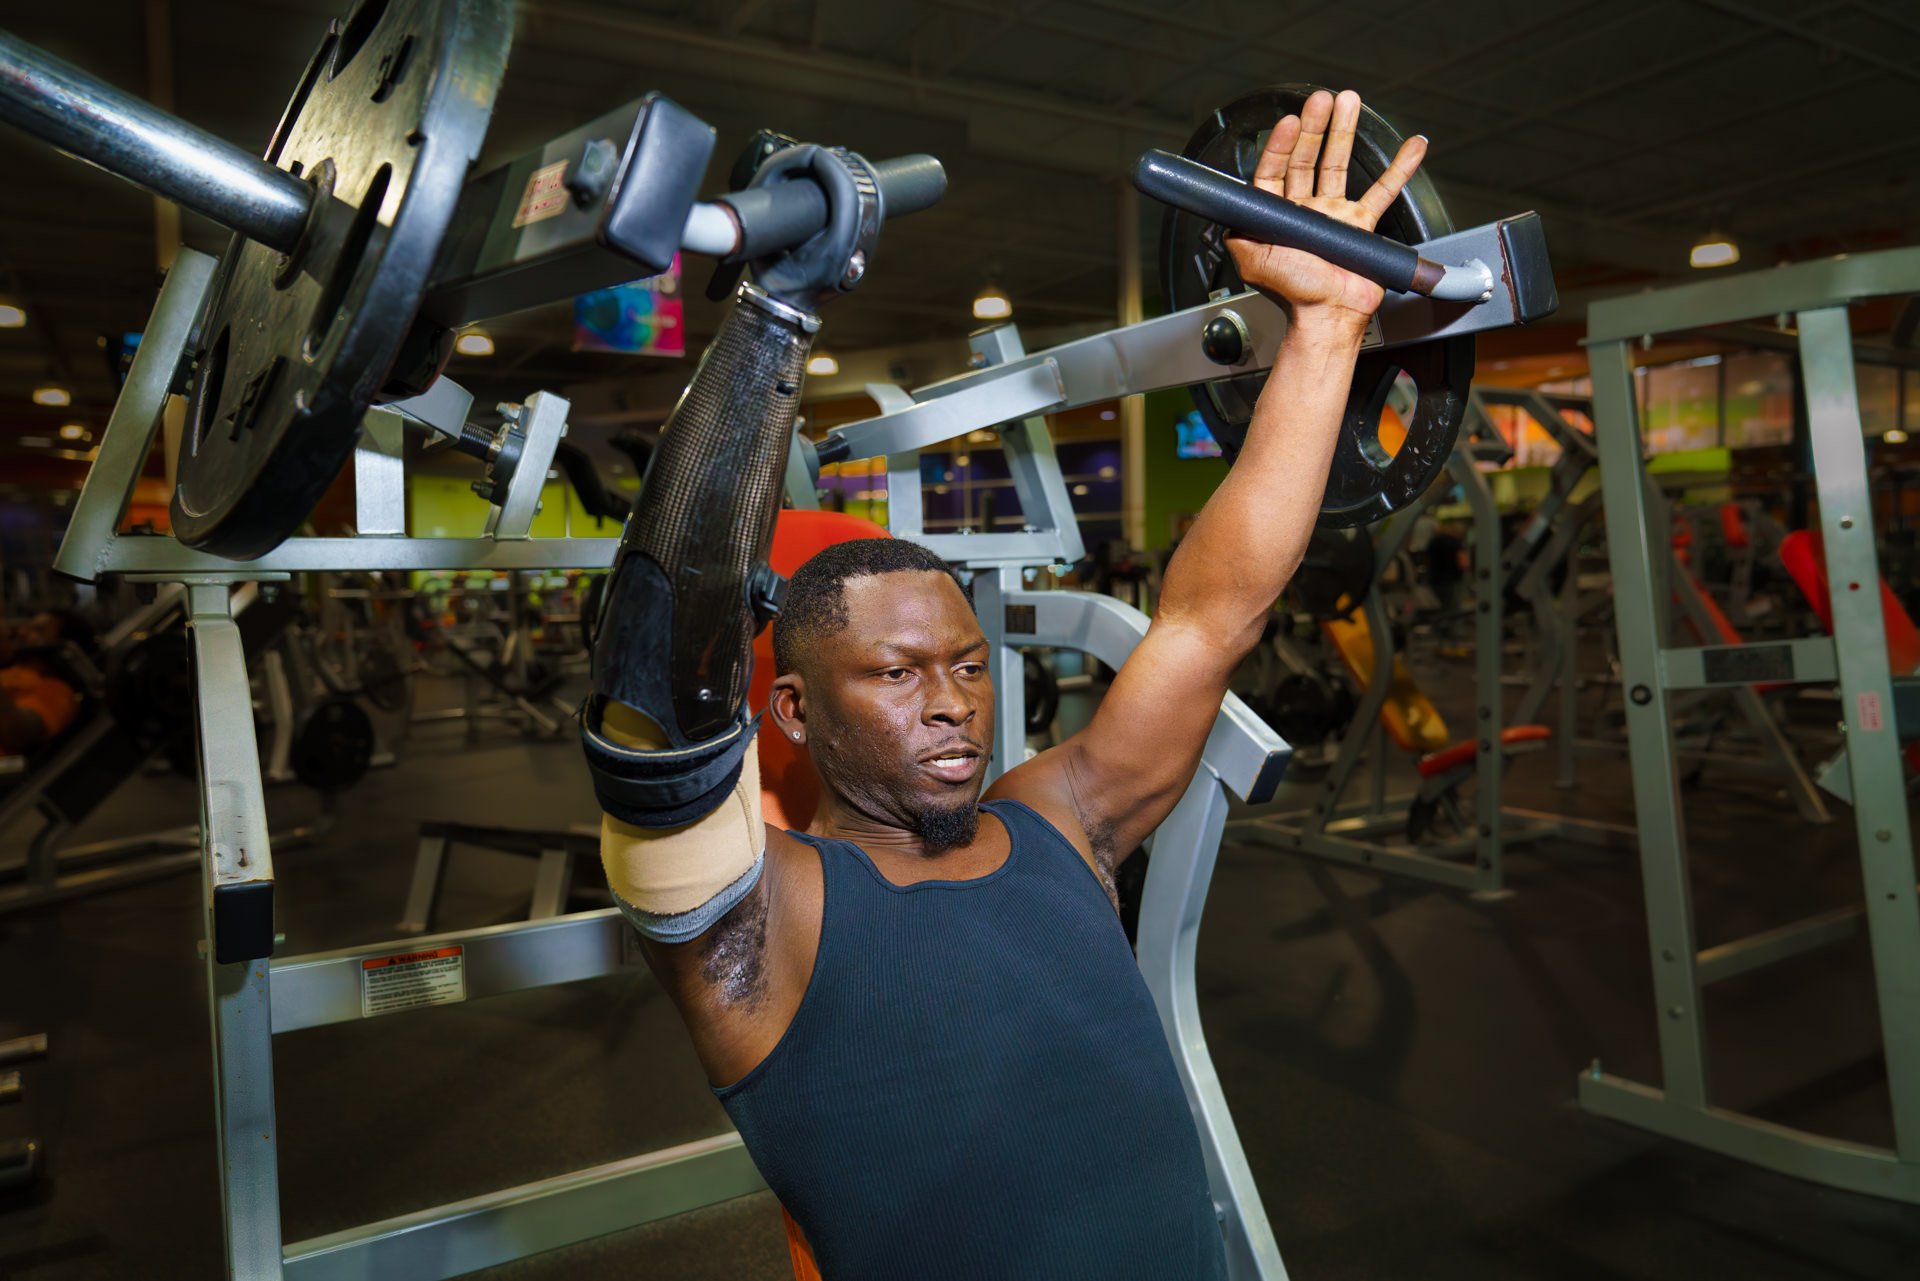 Xavier Collier at the gym with his activity-specific workout prosthesis